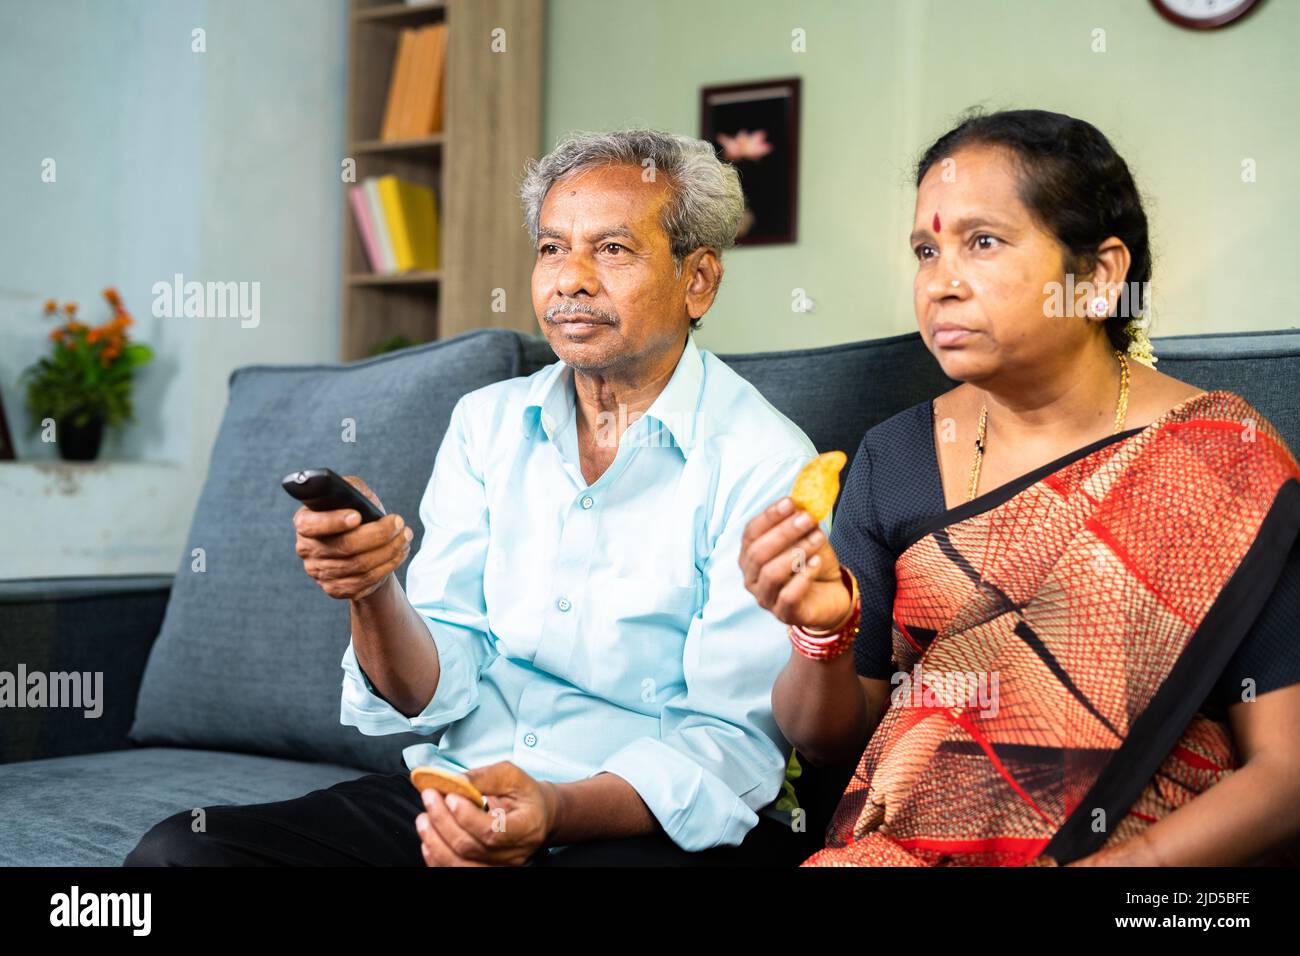 Senior couple at home busy watching tv by surfing channel at home - concept of leisure activities, entertainment and relaxing lifestyle Stock Photo